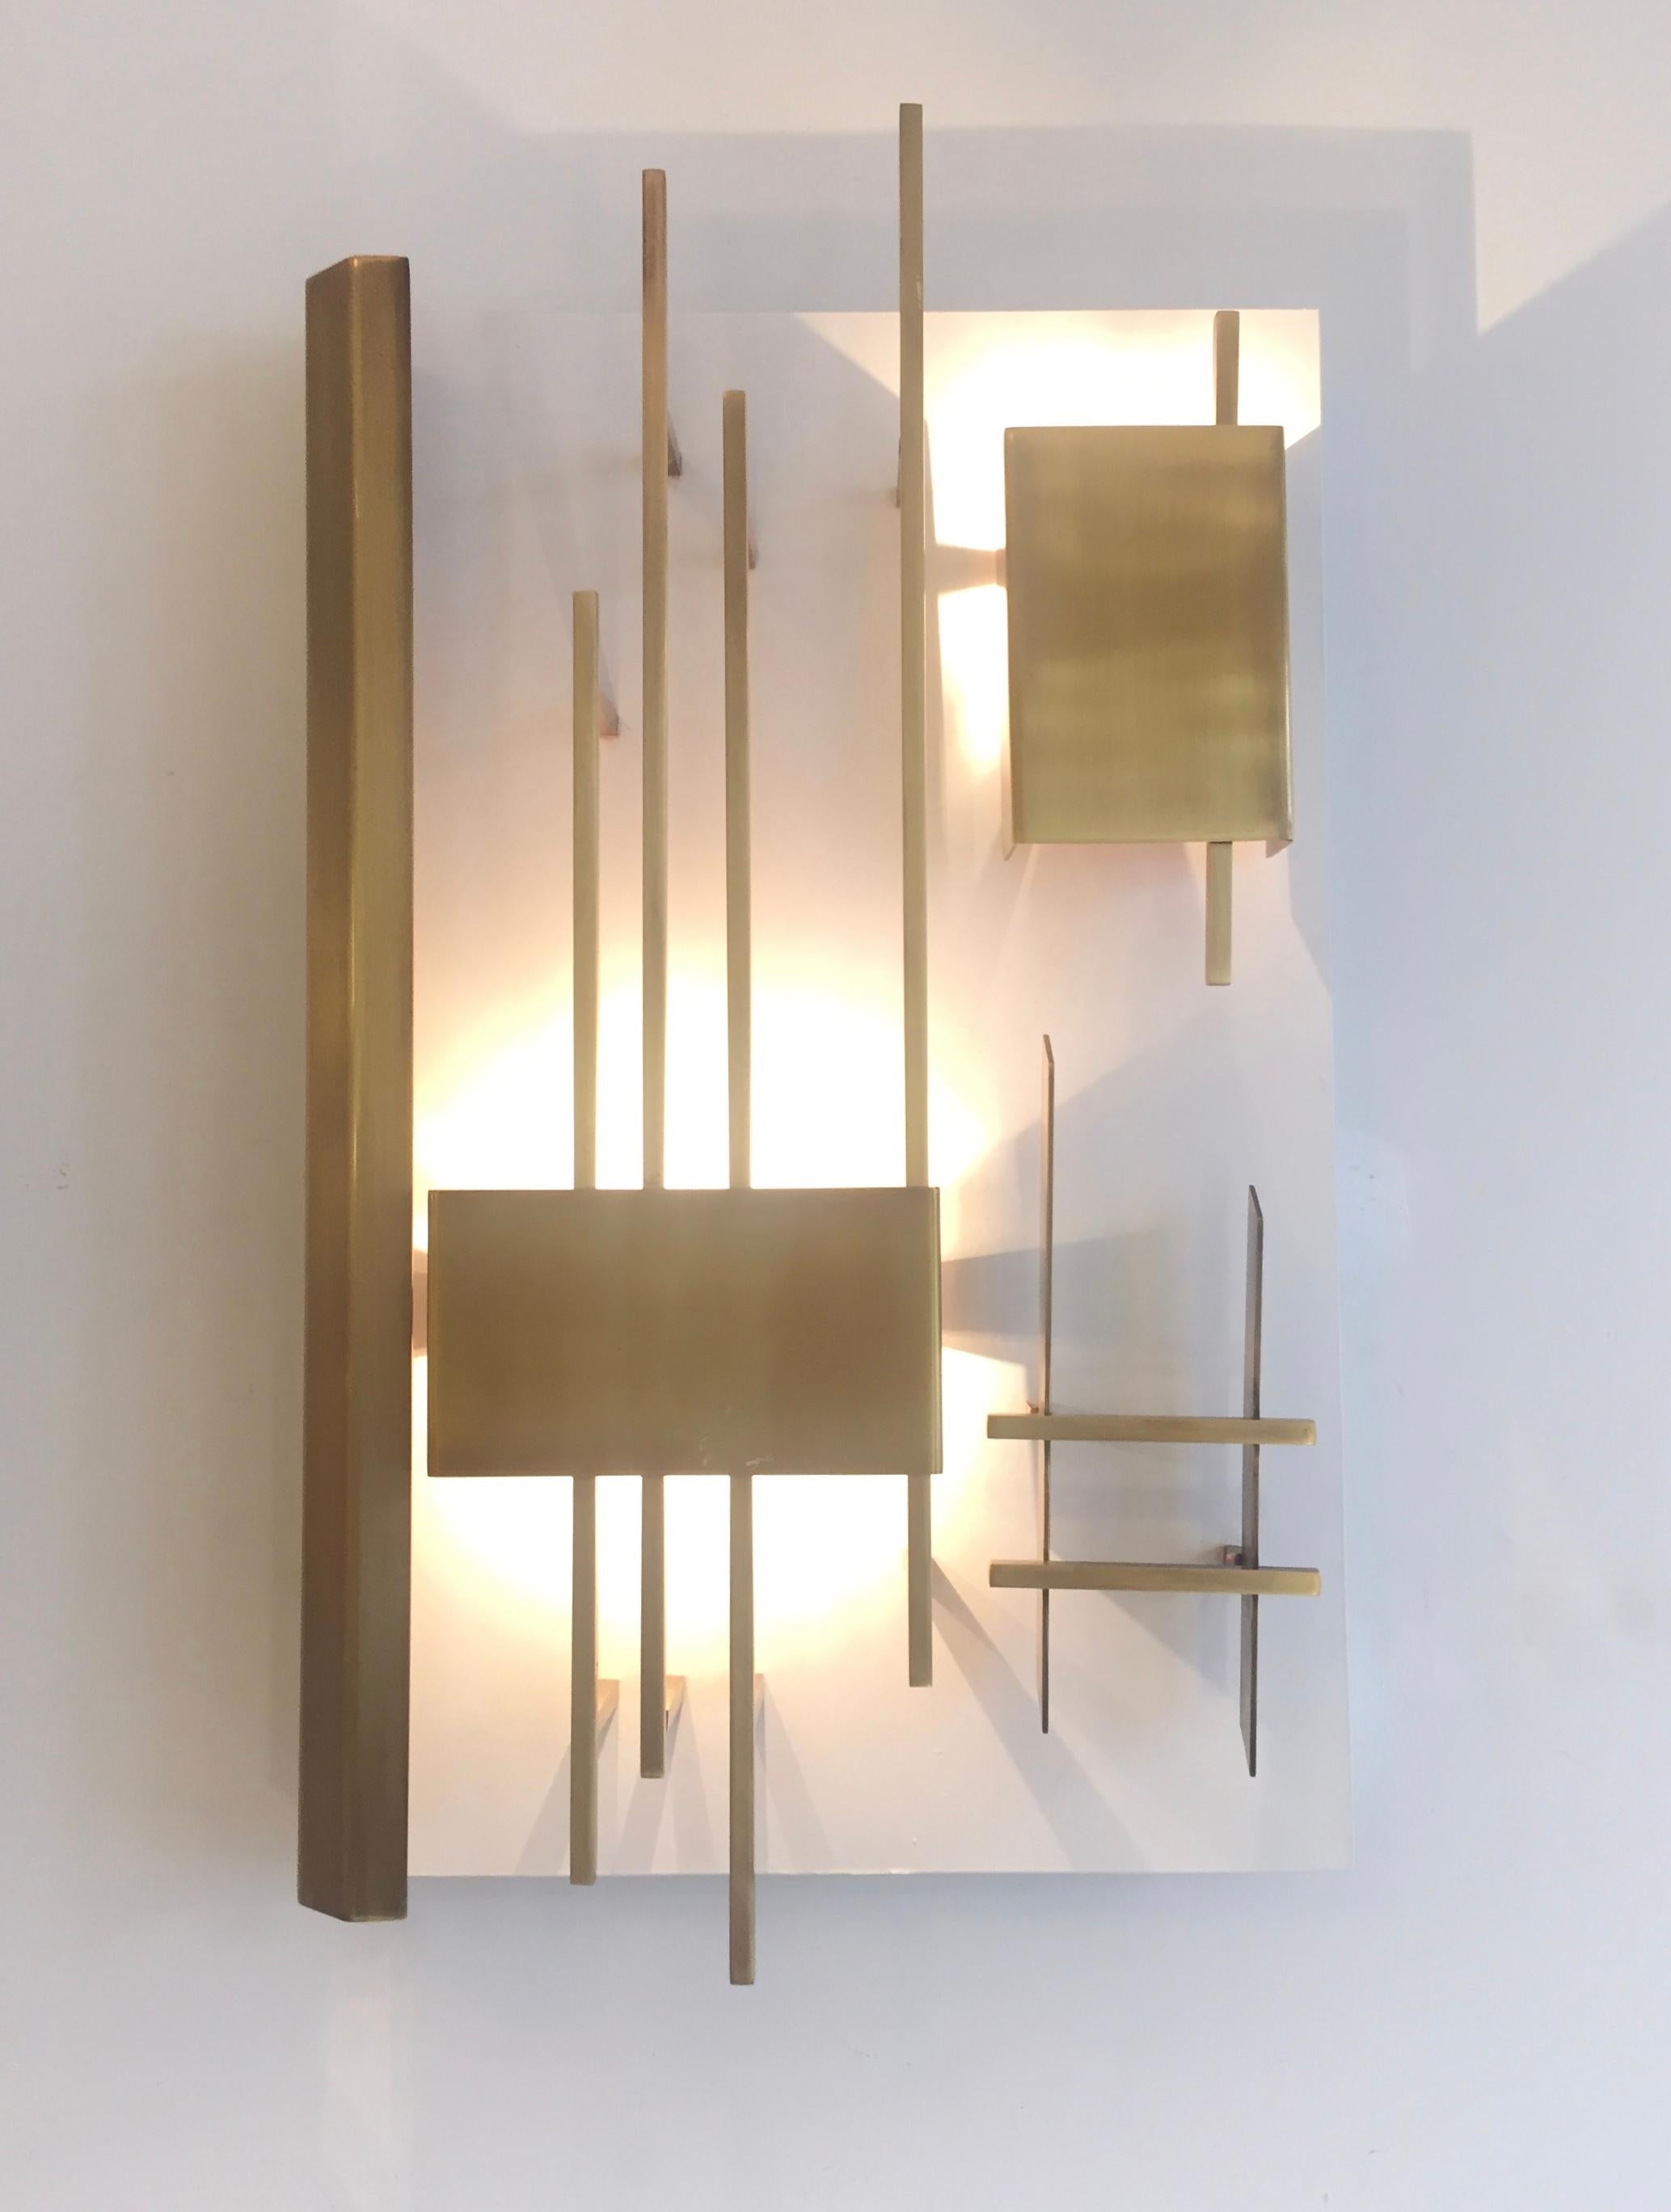 Pair of Gio Ponti vintage sconces, model 575, edited by Lumi in 1972.Brass and enameled brass architectural rods and geometric shapes fixed over a square plate of ivory lacquered metal.
Provenance:The sconces originate from the property of Madrid